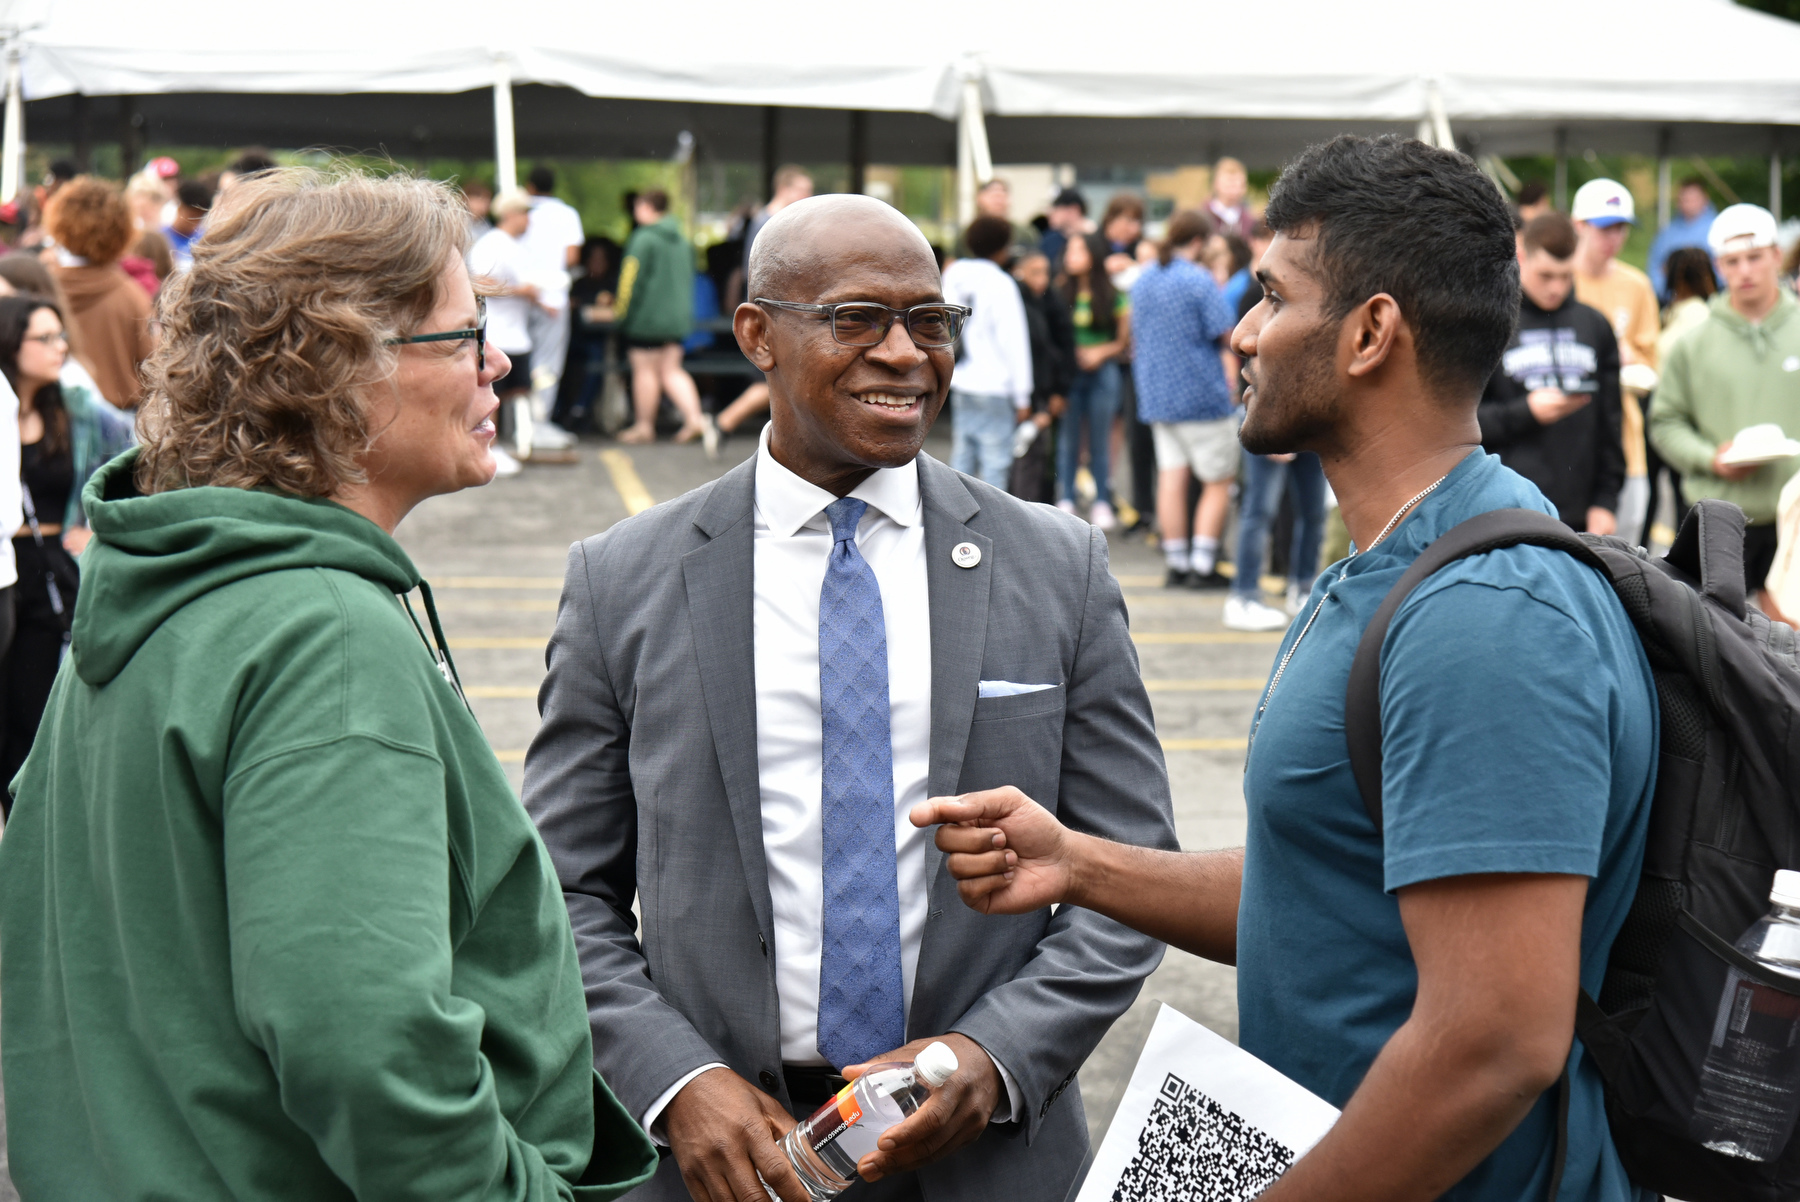 SUNY Oswego President Peter O. Nwosu and Kathleen Kerr, Vice President for Student Affairs, talk with graduate student Kranthi Kumar Erra during the Aug. 24 Taste of Oswego campus event which provided the campus community with delicious food from vendors and local restaurants in the greater Oswego area.